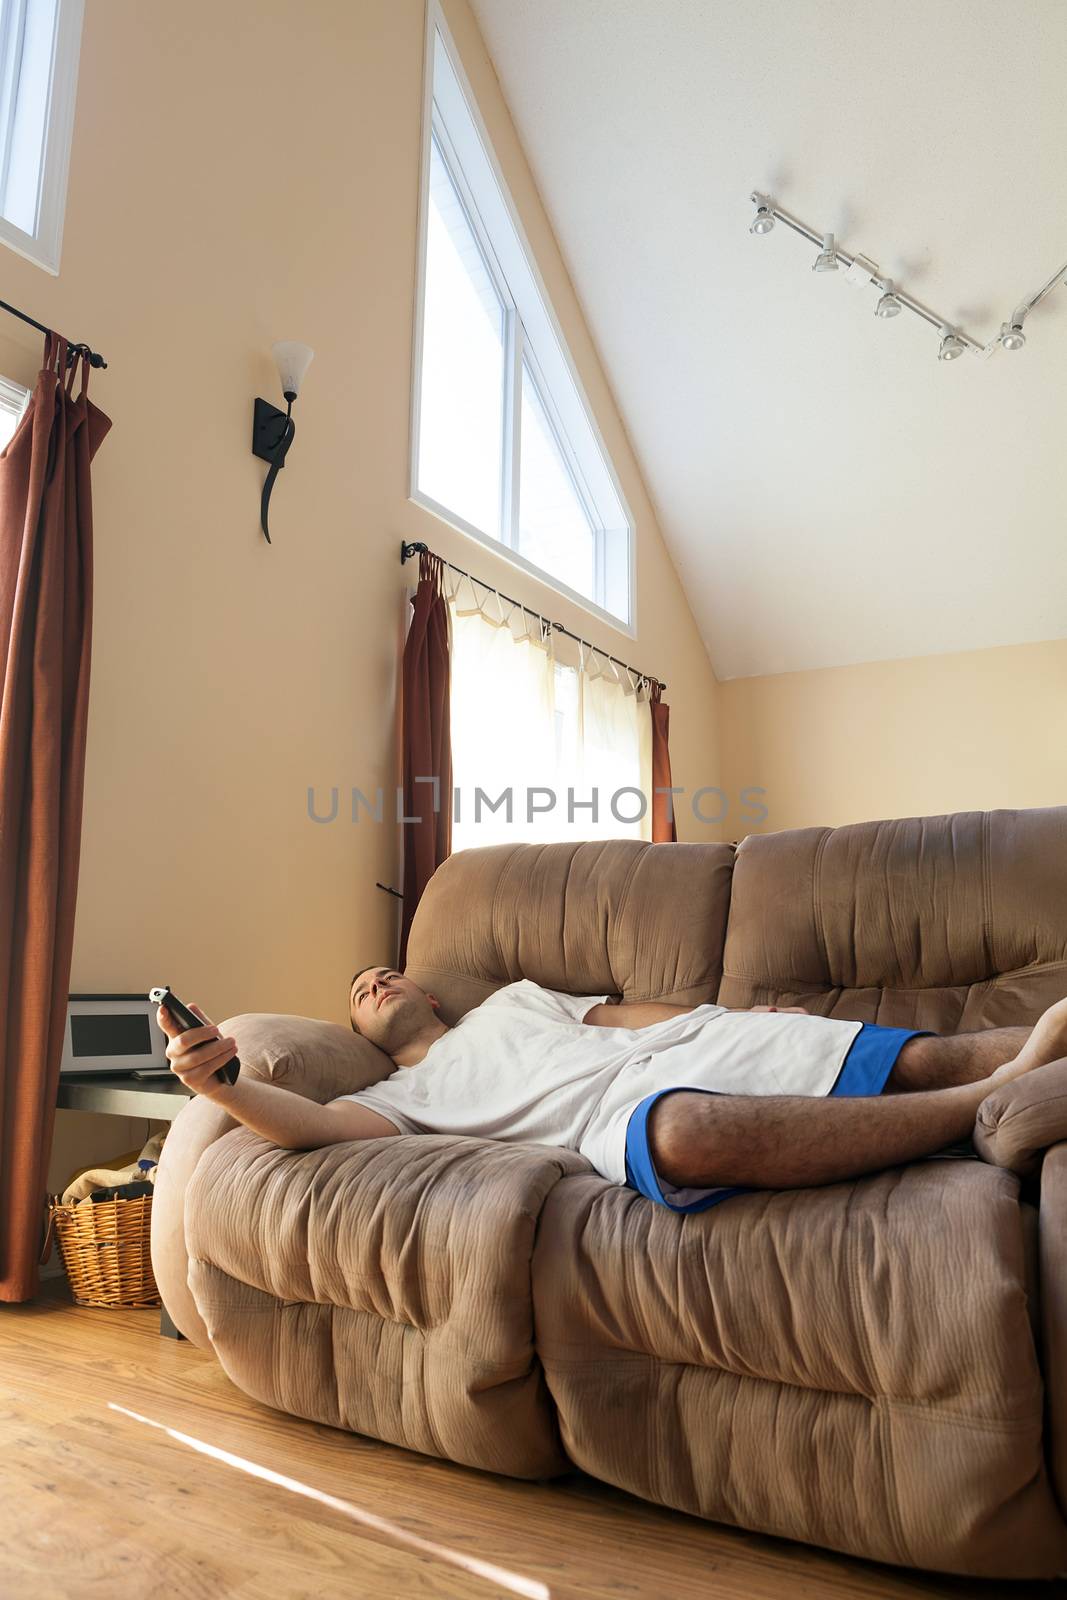 Lazy Man Laying on the Sofa by graficallyminded